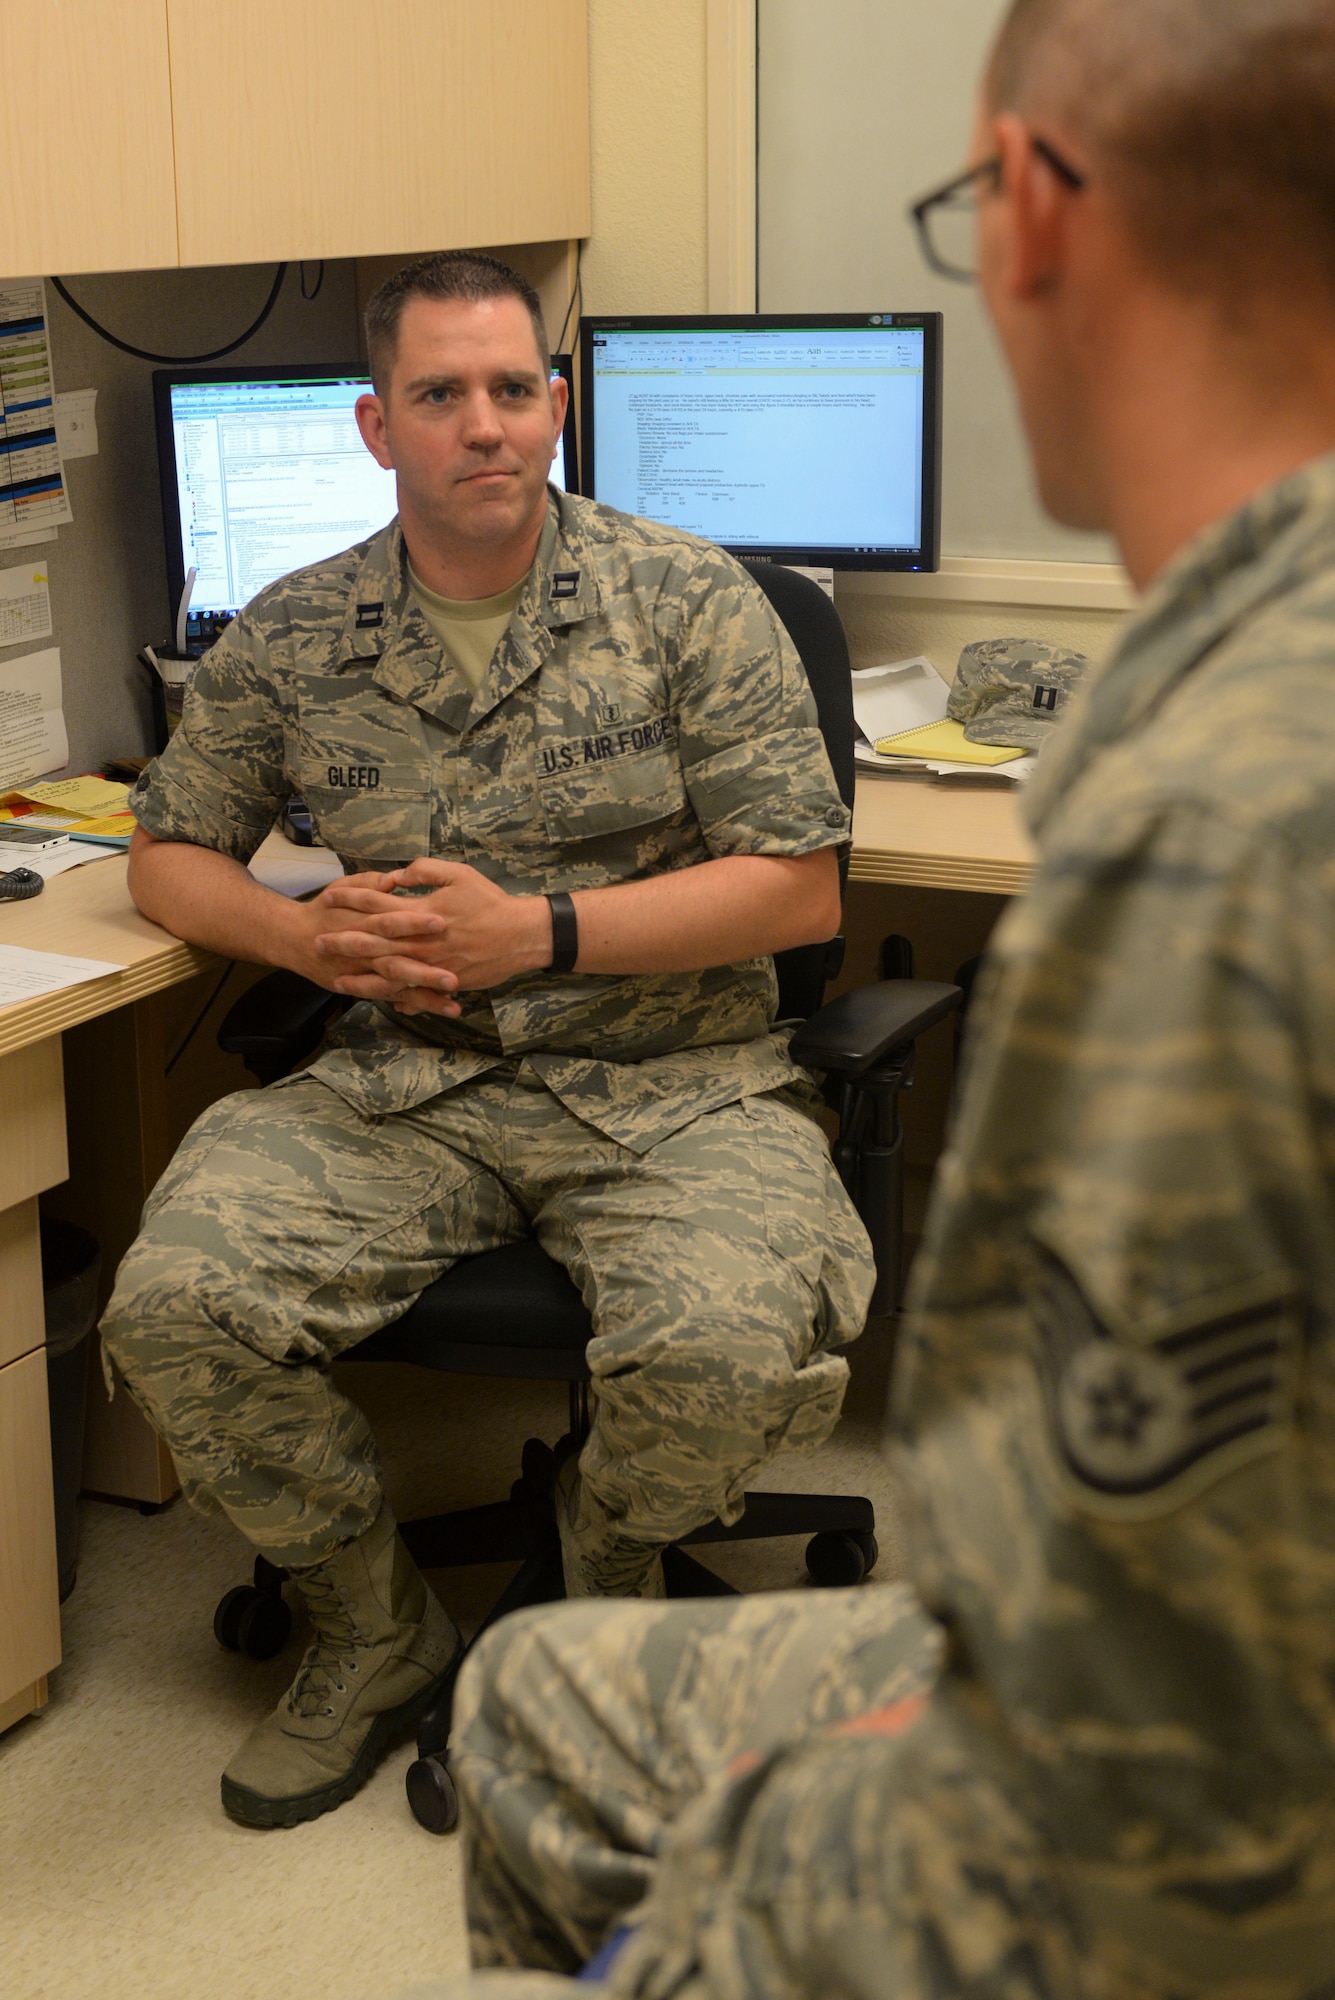 Capt. Justin Gleed, a physical therapist assigned to the 5th Medical Operations Squadron at Minot Air Force Base, N.D., consults with a patient June 10, 2016. U.S Air Force physical therapists use guided exercises, hands-on treatment and pain management modalities to ensure patients get the treatment necessary to heal. (U.S. Air Force photo/Airman 1st Class Jessica Weissman)